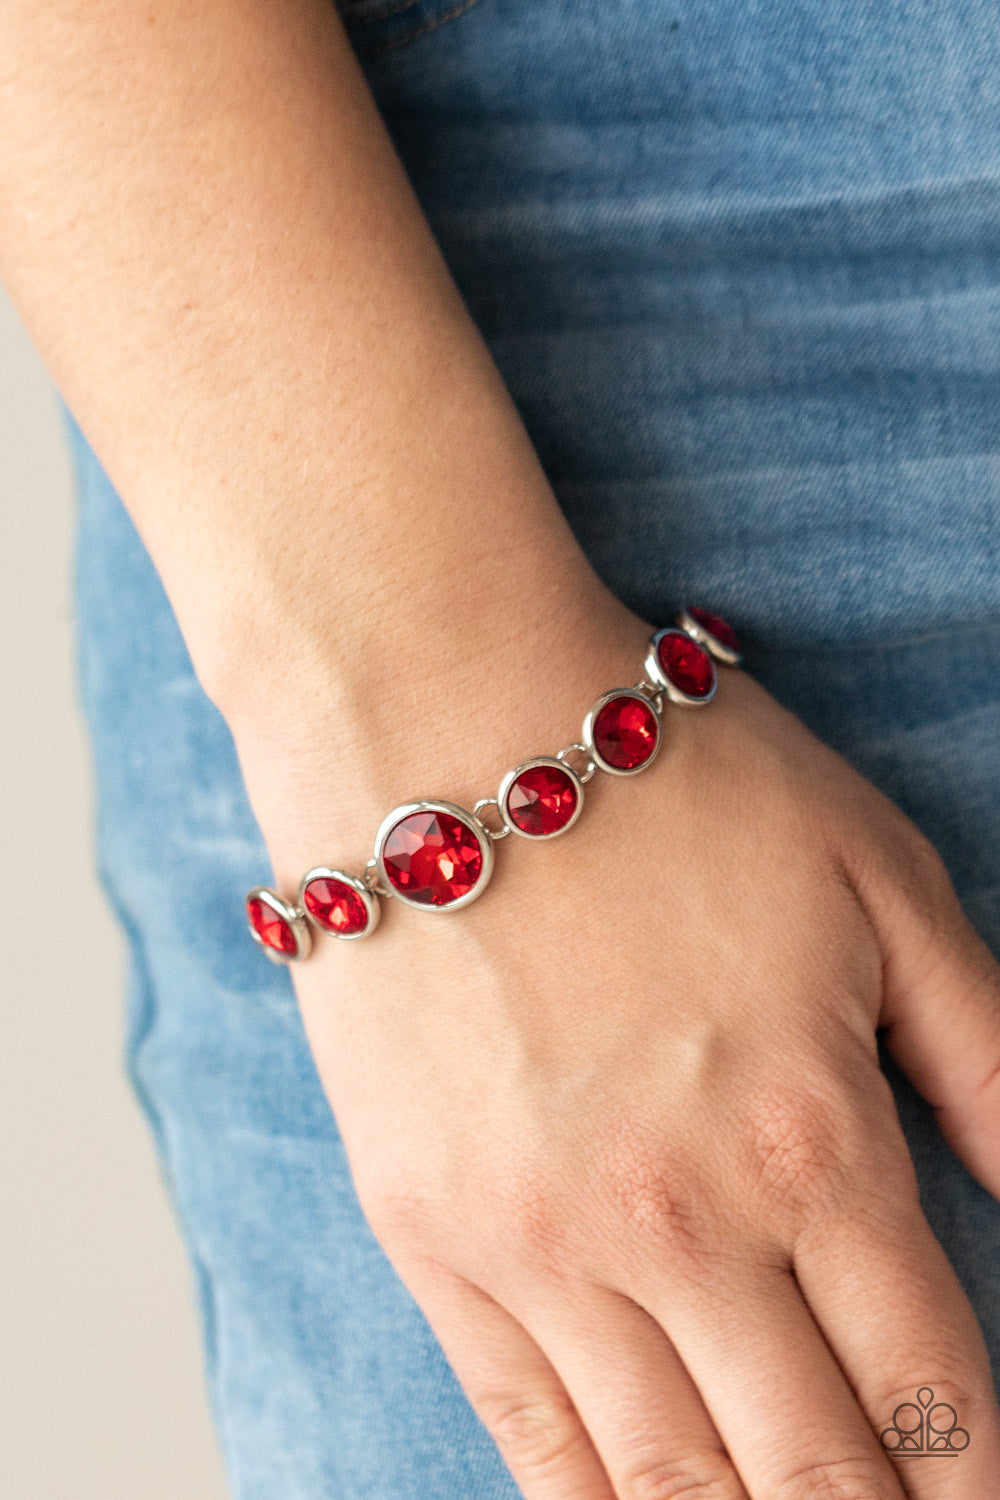 Lustrous Luminosity - Red Rhinestone Bracelets featuring sleek silver fittings, an oversized collection of fiery red gems delicately link around the wrist. The centermost gem is slightly larger than the rest, adding a glamorous finish. Features an adjustable clasp closure.  Sold as one individual bracelet.  Paparazzi Jewelry is lead and nickel free so it's perfect for sensitive skin too!